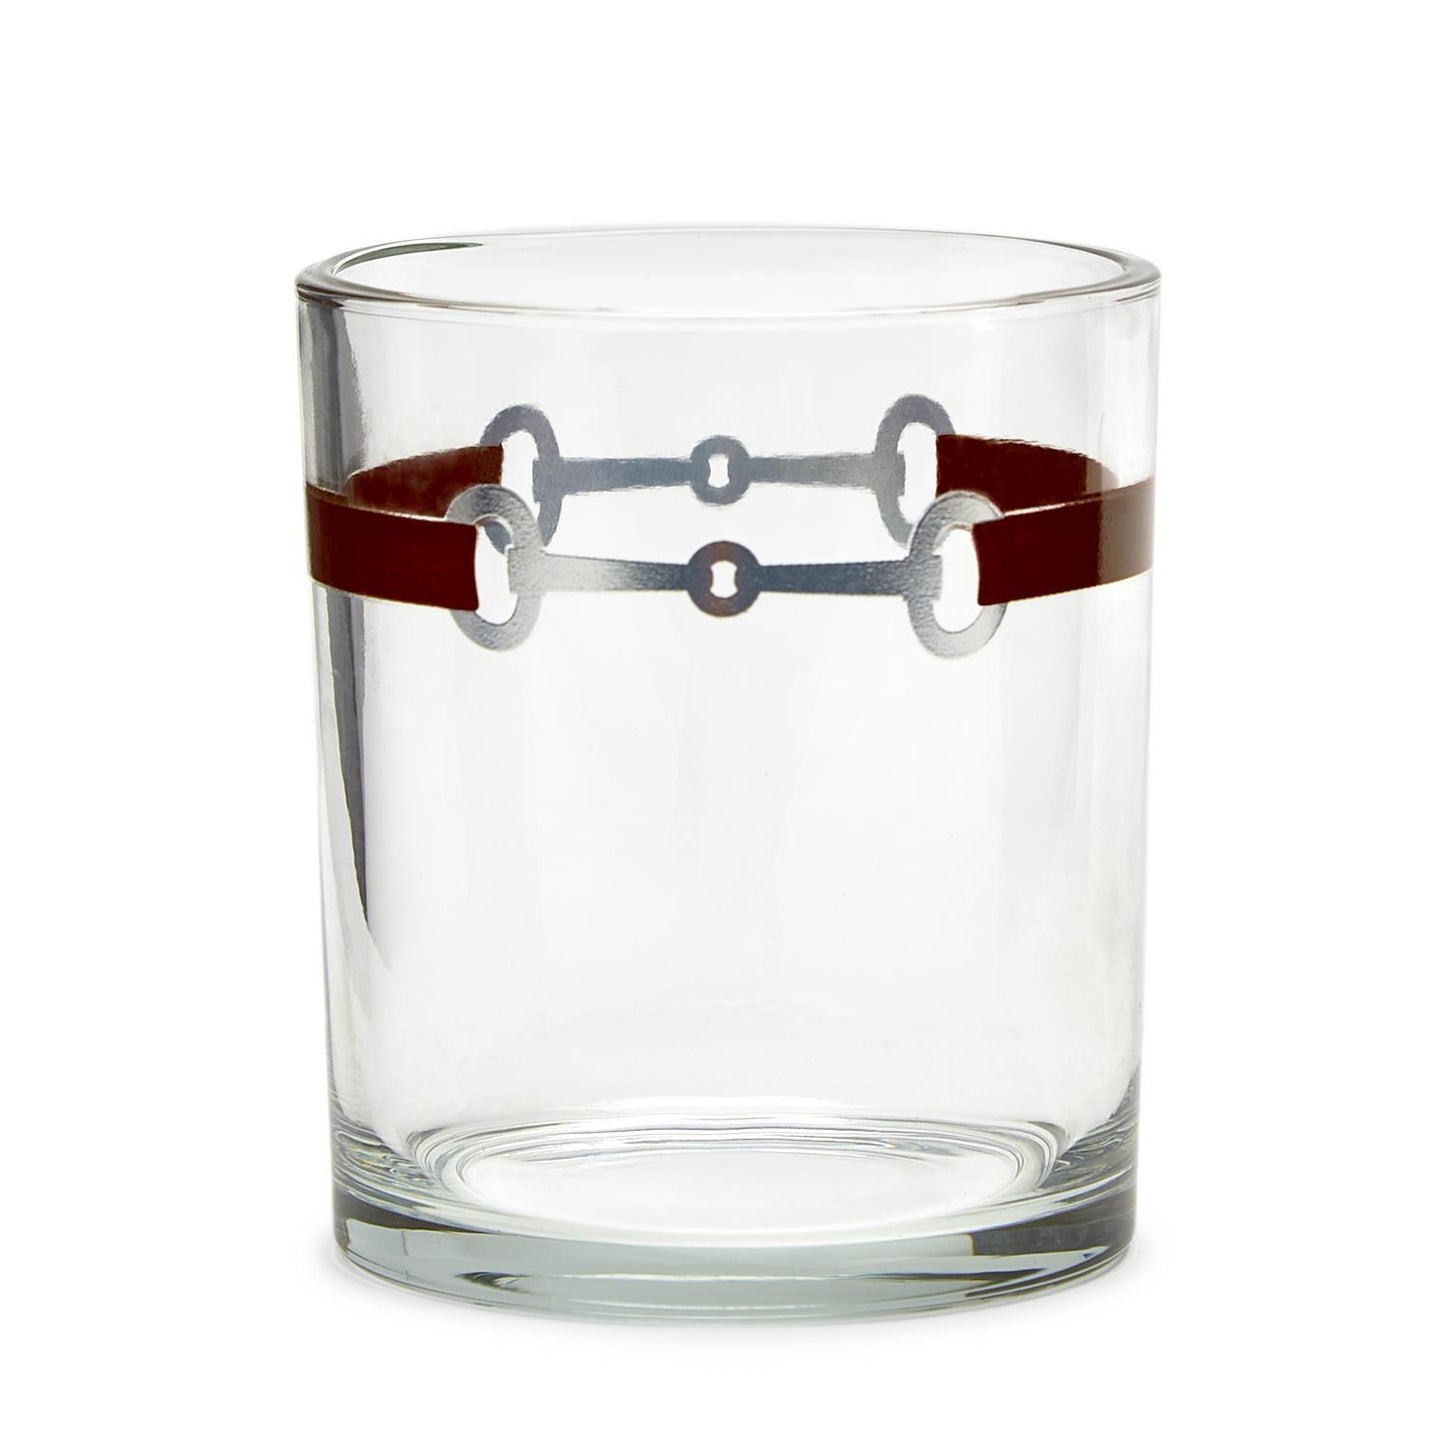 Two's Company Just A Bit Set Of 4 Double Old Fashion Glasses In Gift Box.